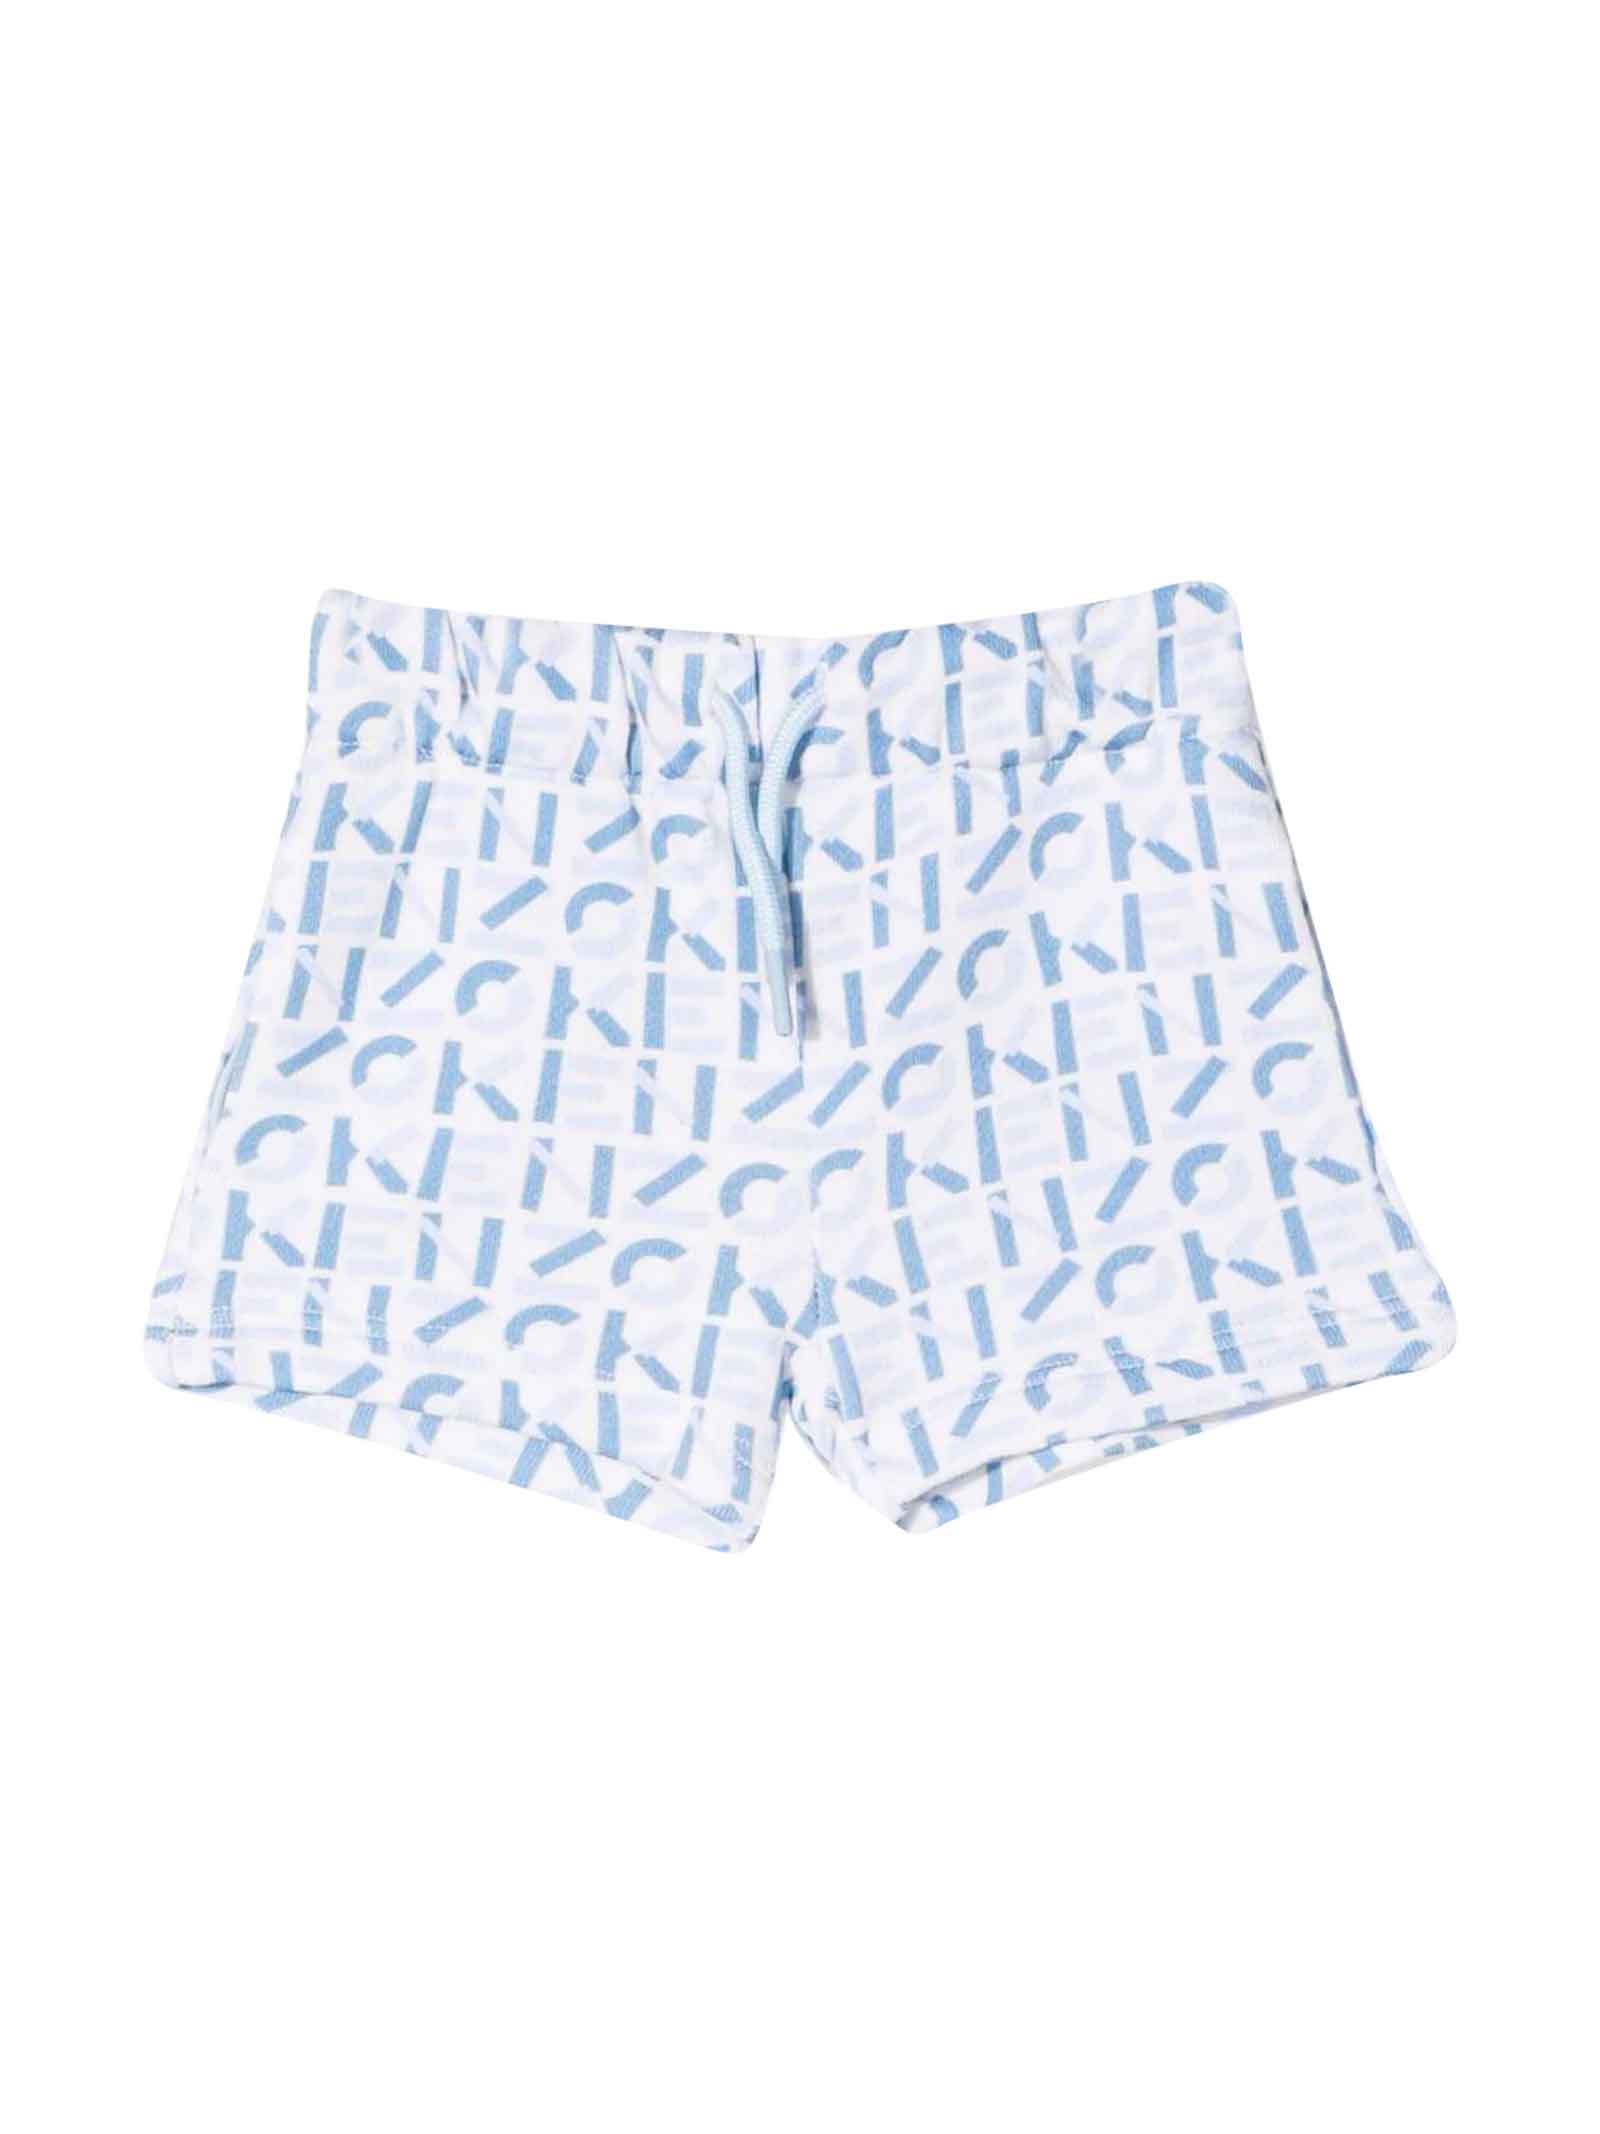 Kenzo Kids Newborn Sports Shorts With White / Light Blue All-over Print By